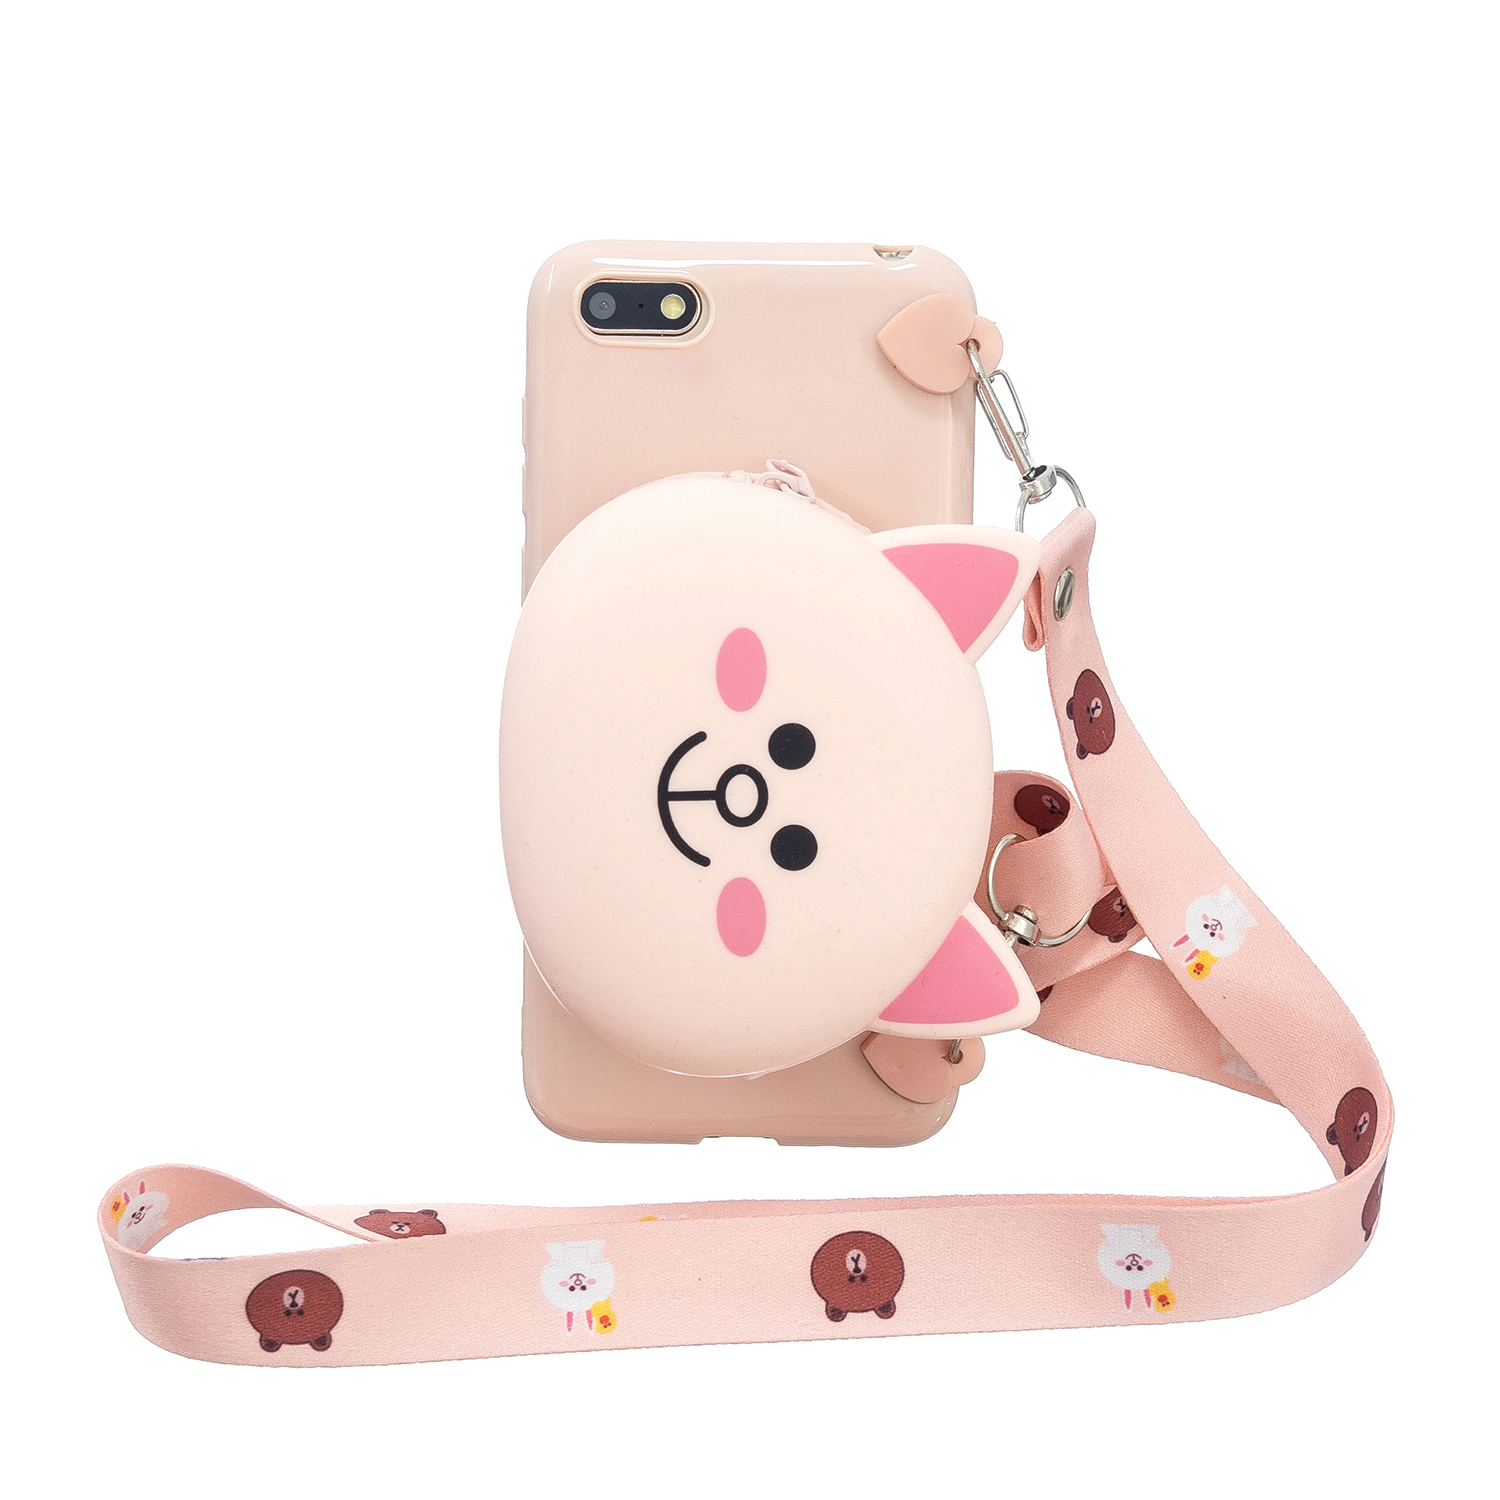 For HUAWEI Y5 2018/Y5 2019 Cellphone Case Mobile Phone Shell Shockproof TPU Cover with Cartoon Cat Pig Panda Coin Purse Lovely Shoulder Starp  Pink